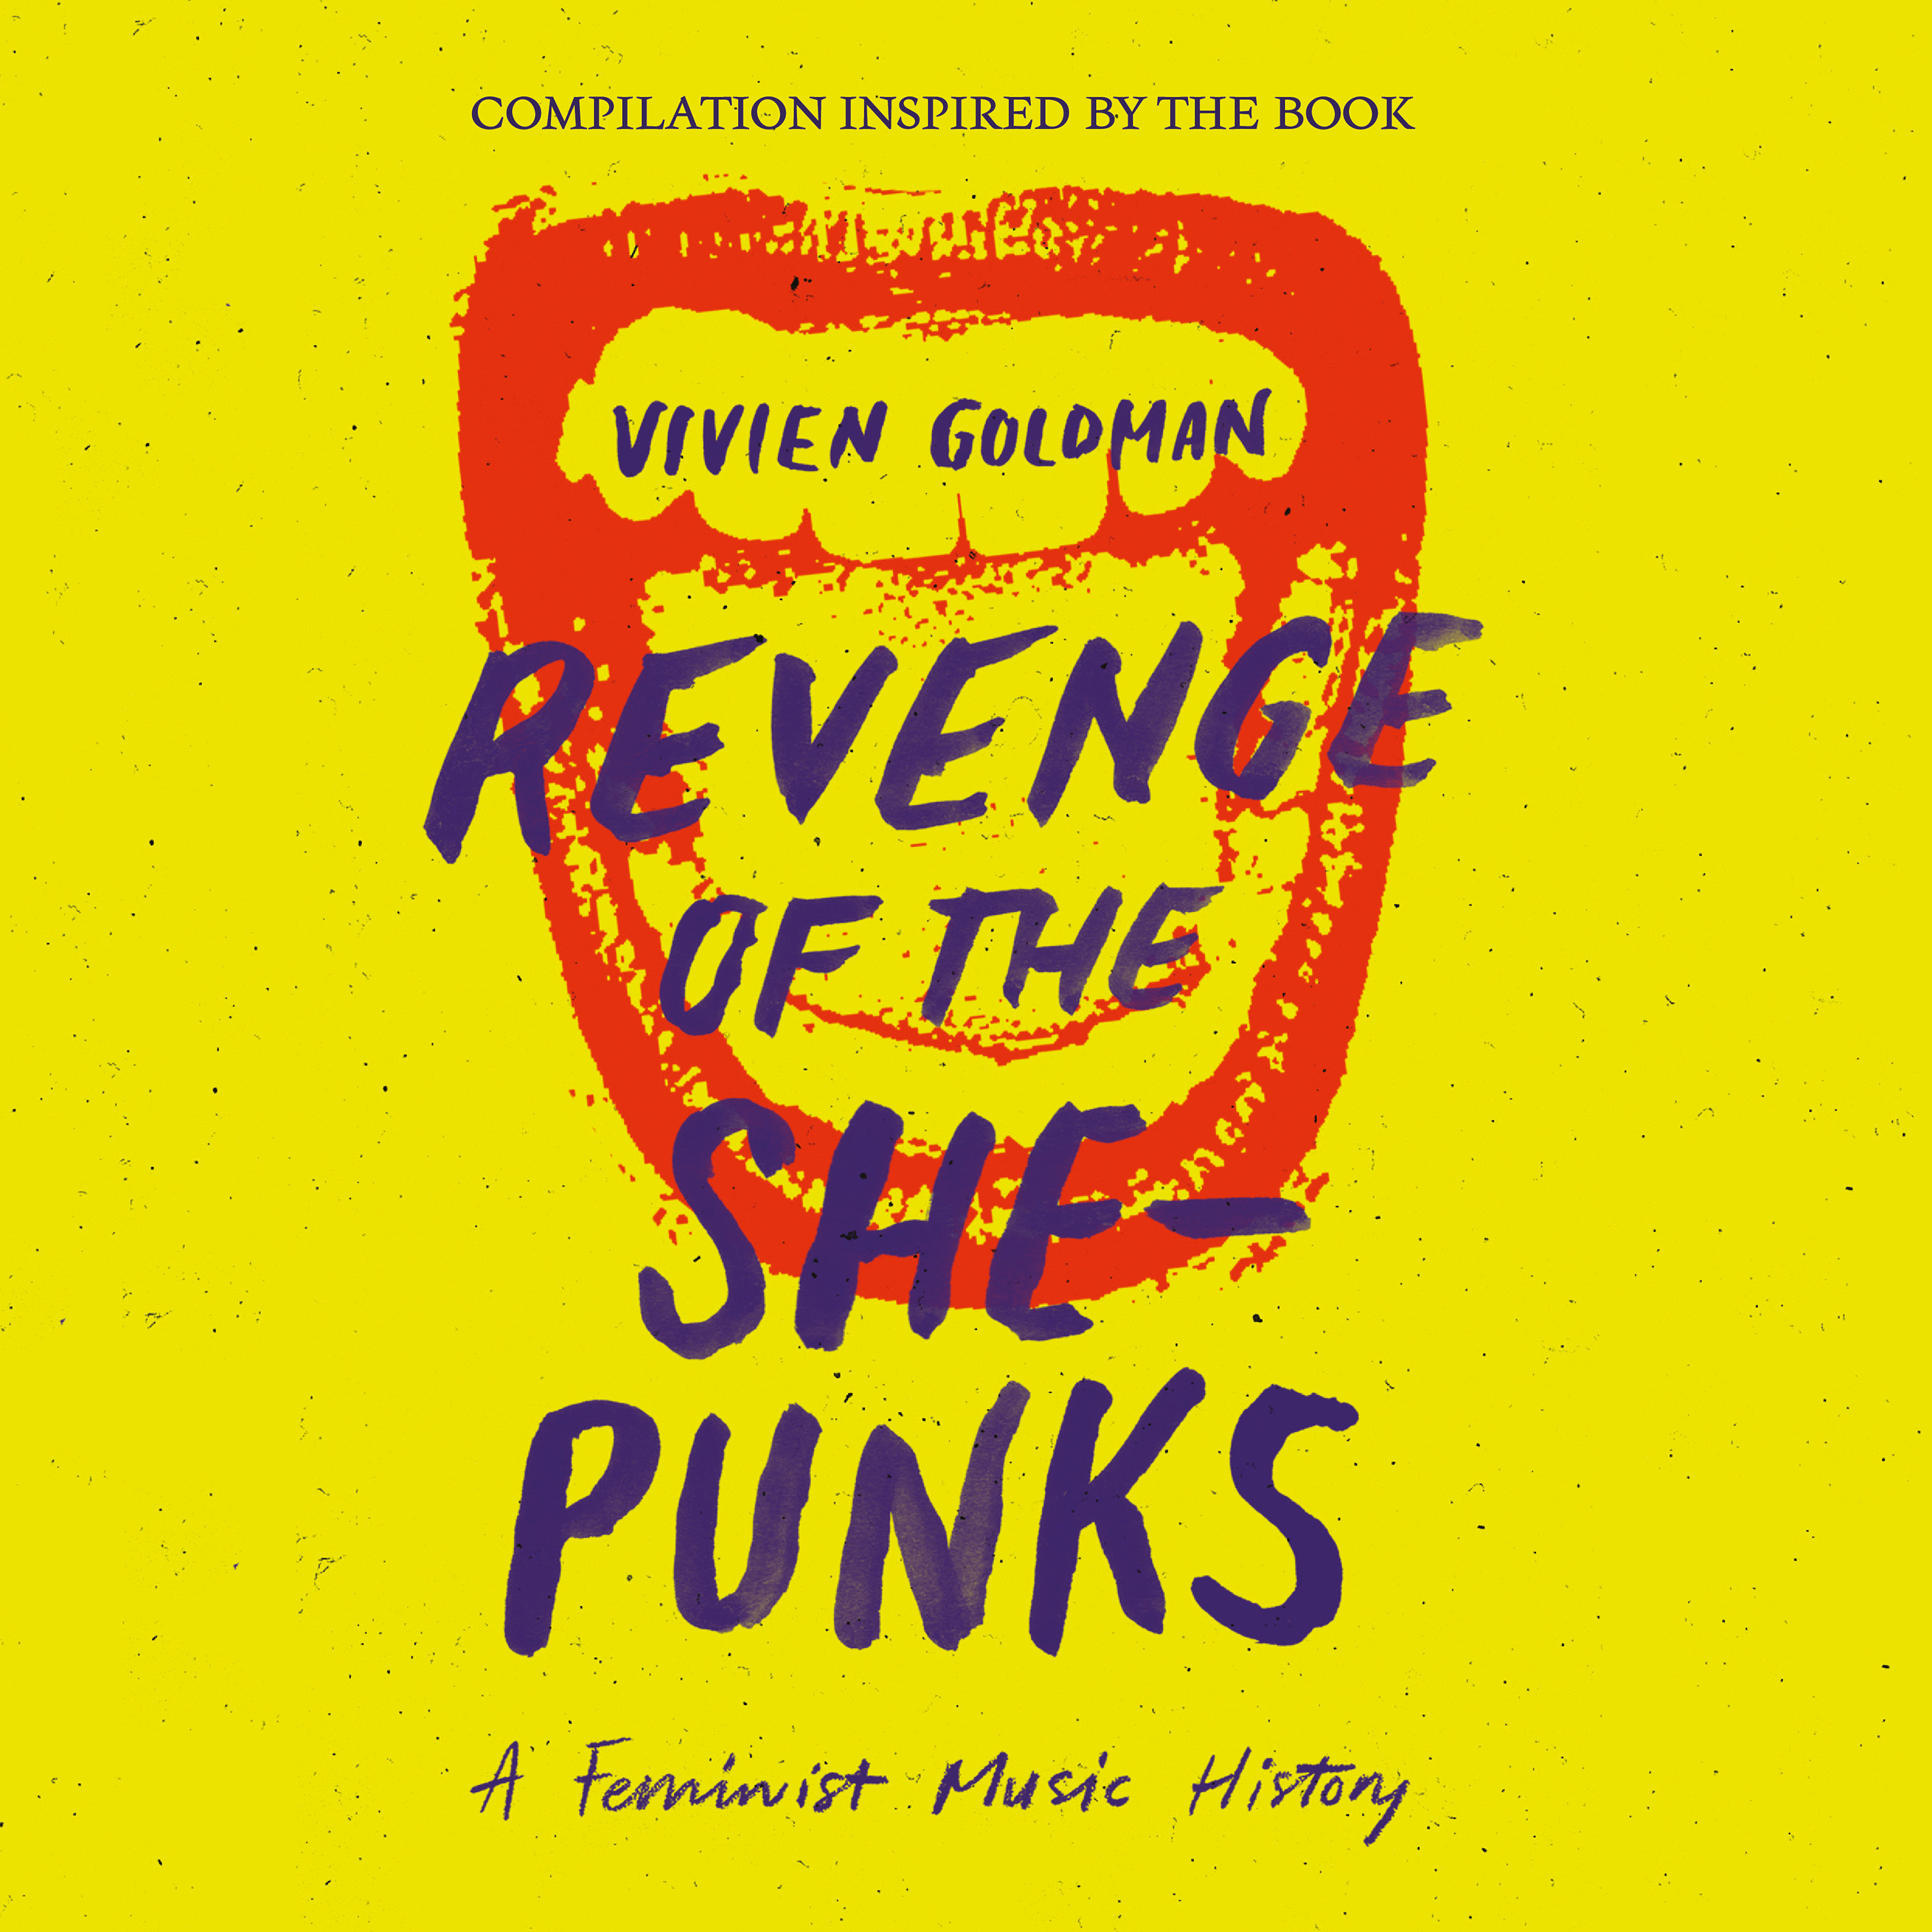 Revenge of the She-Punks - Compilation Inspired by the Book by Vivien Goldman